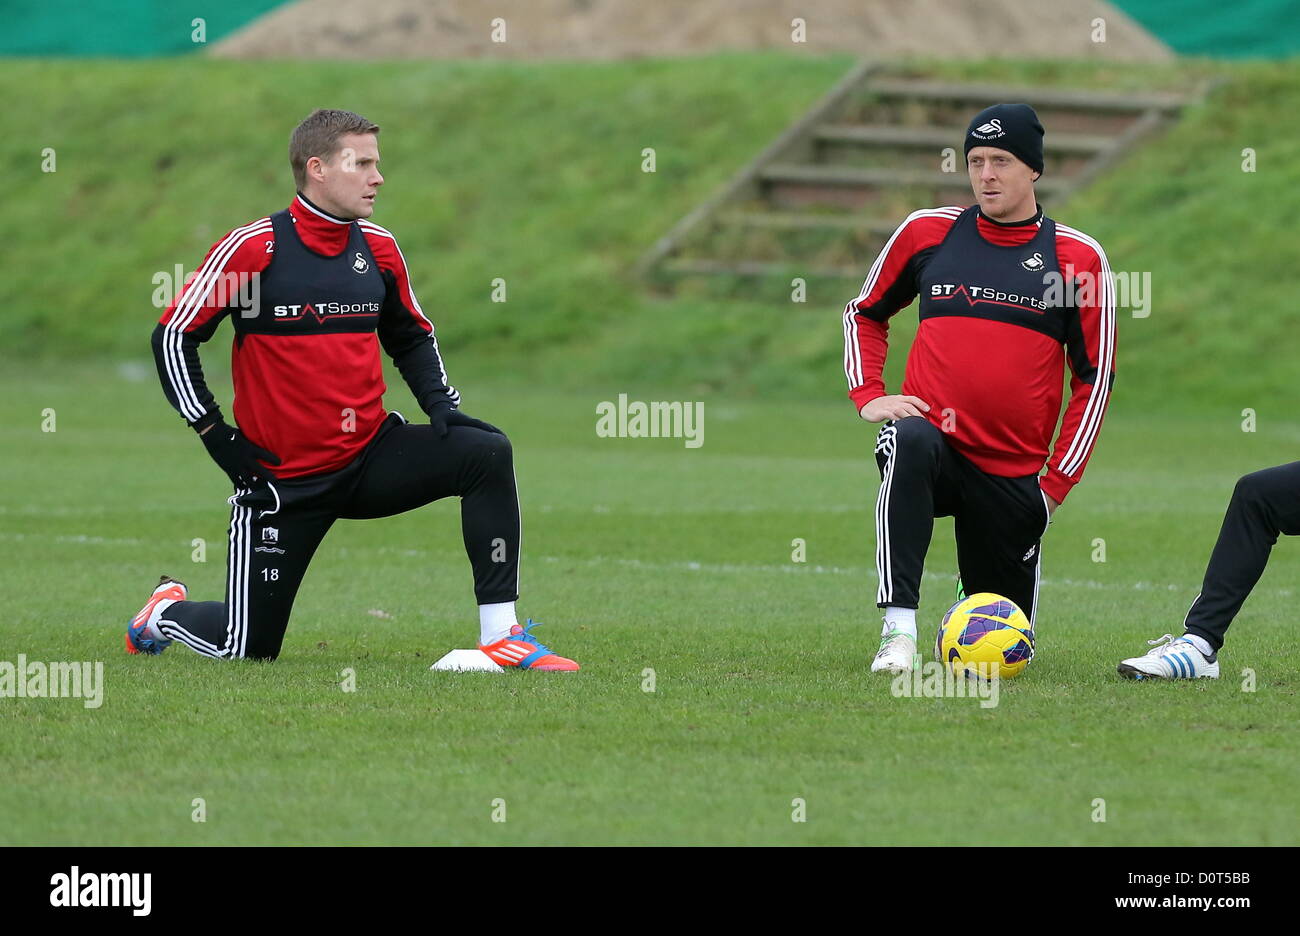 Wales, UK. Friday, 30 November 2012  Pictured L-R: Mark Gower and Garry Monk.   Re: Swansea City FC, training at the Llandarcy training ground in south Wales. Stock Photo